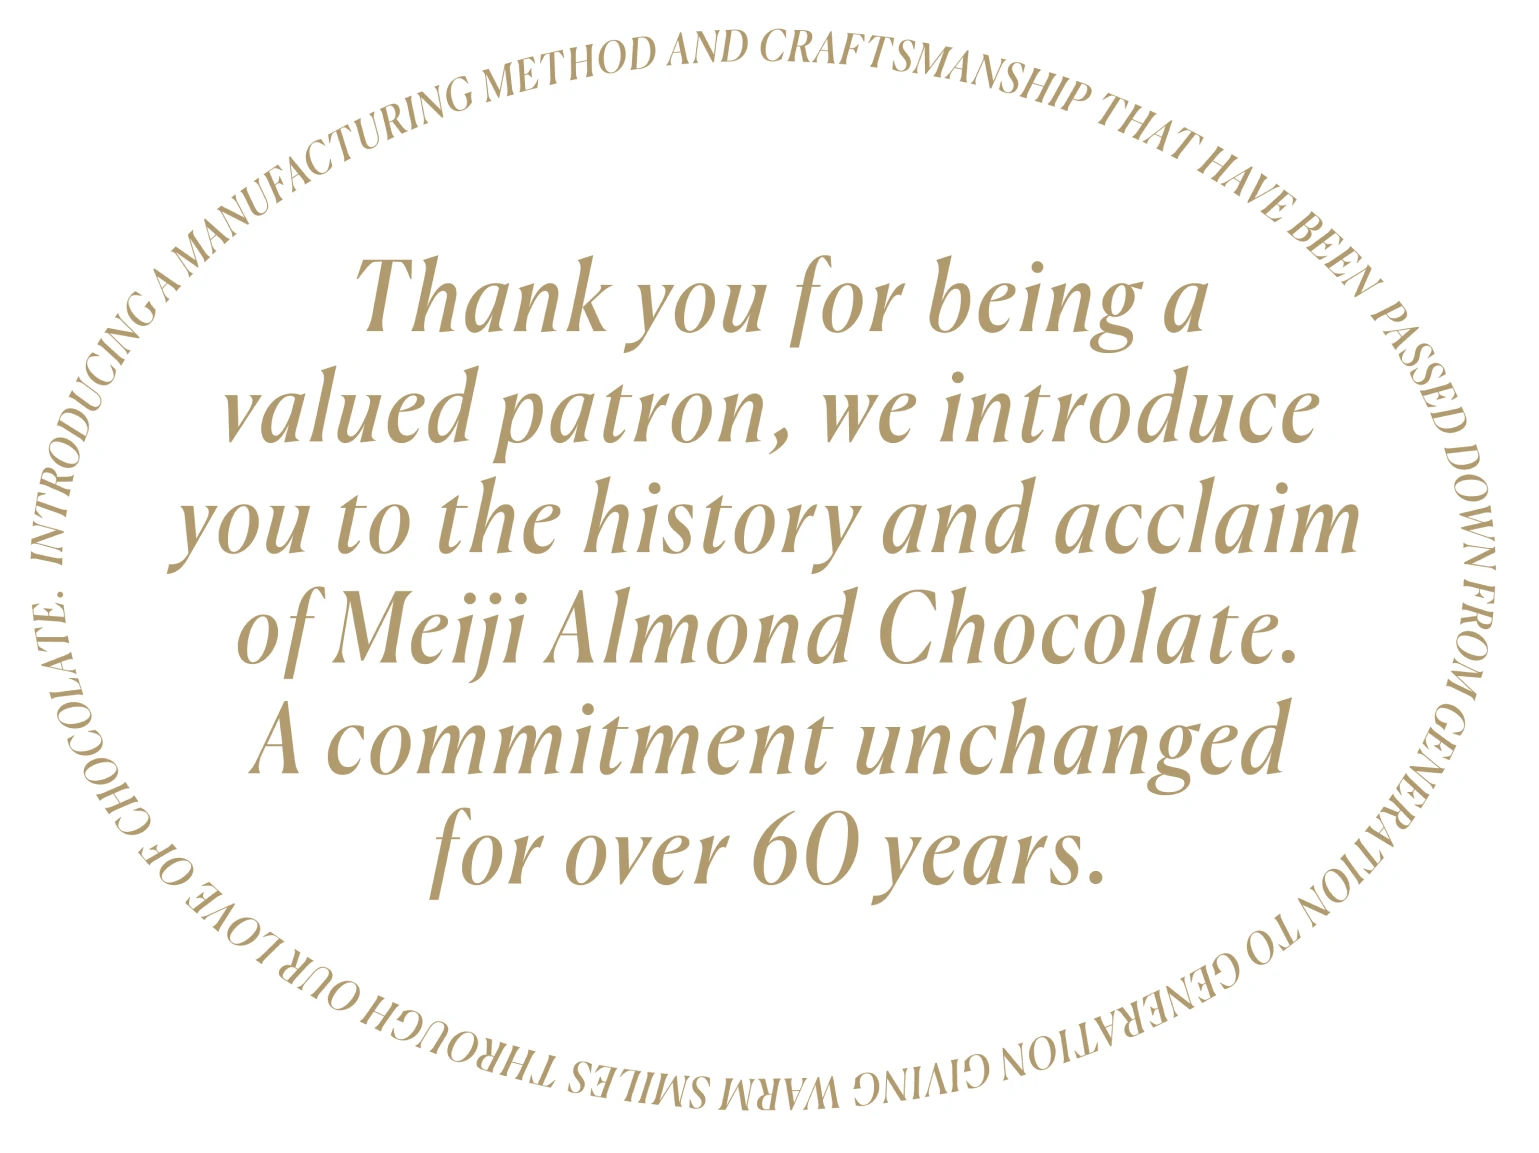 Thank you for being a valued patron, we introduce you to the history and acclaim of Meiji Almond Chocolate. A commitment unchanged for over 60 years.